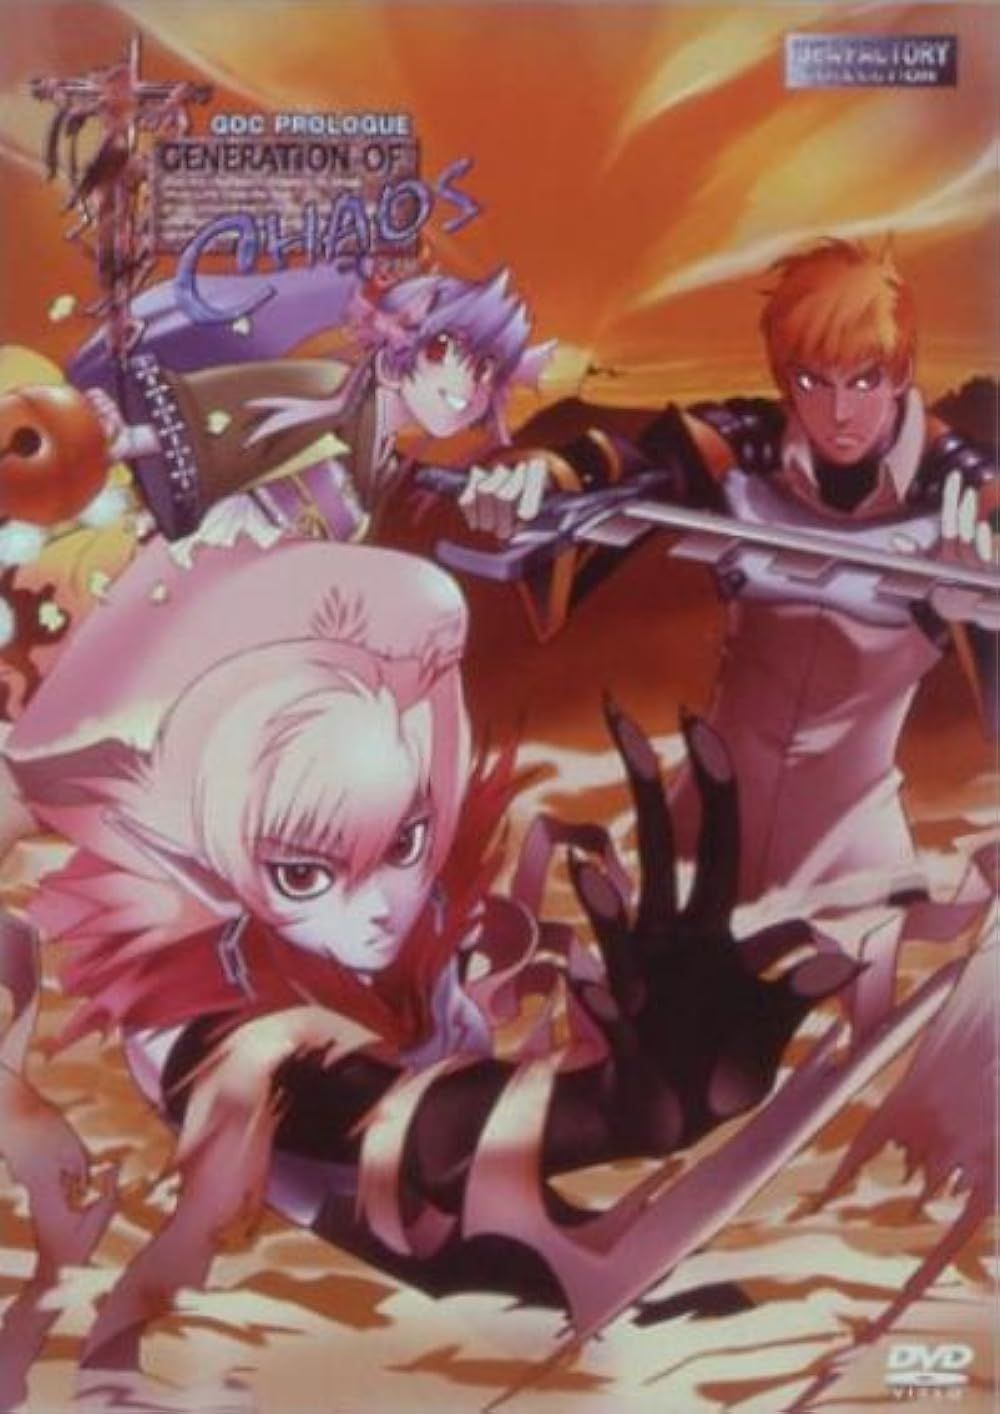 Generation of Chaos anime poster